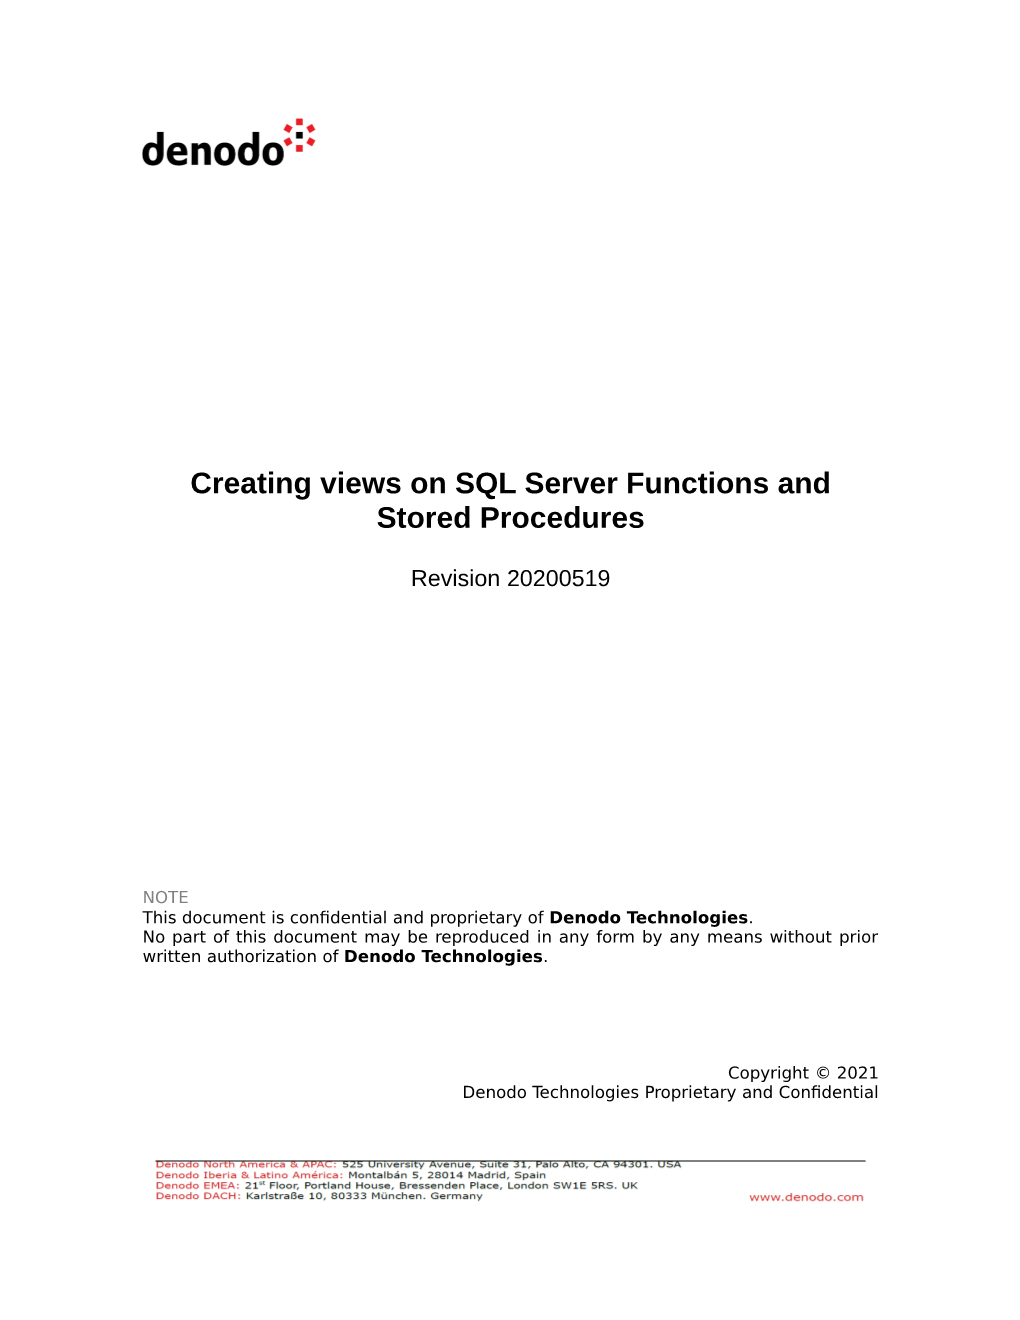 Creating Views on SQL Server Functions and Stored Procedures